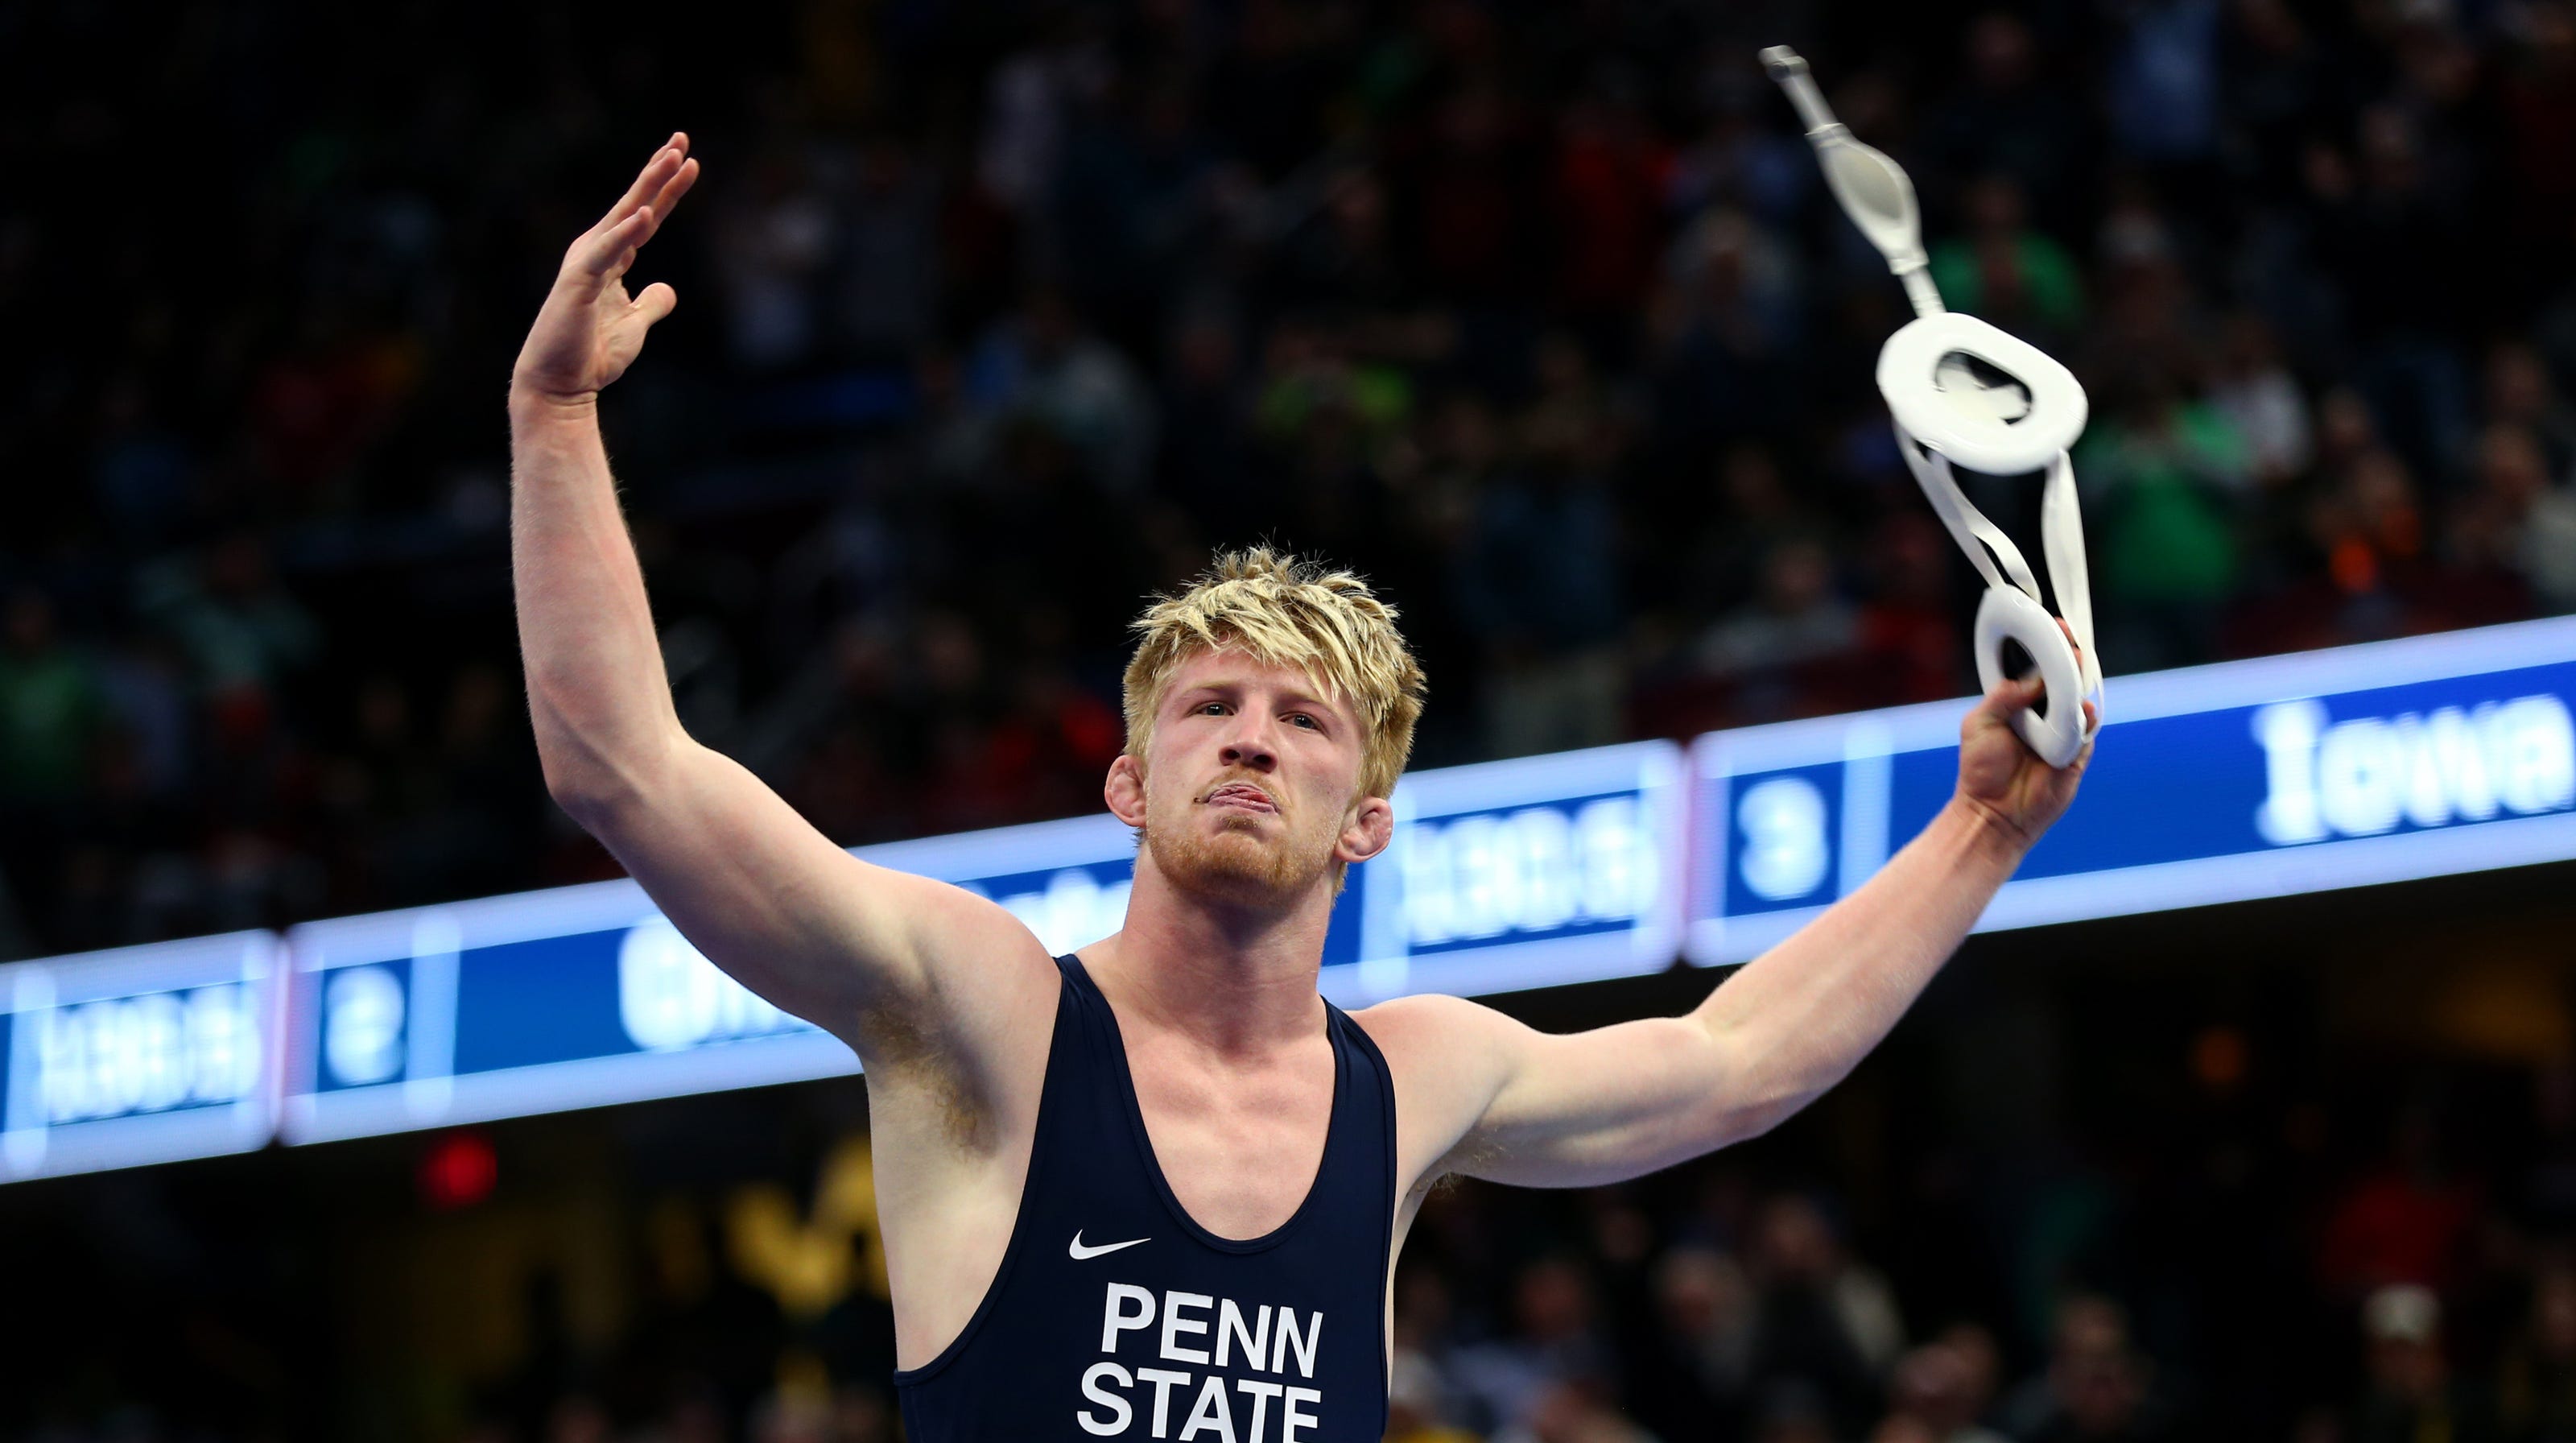 NCAA wrestling 2019 Penn State could be best college team in history